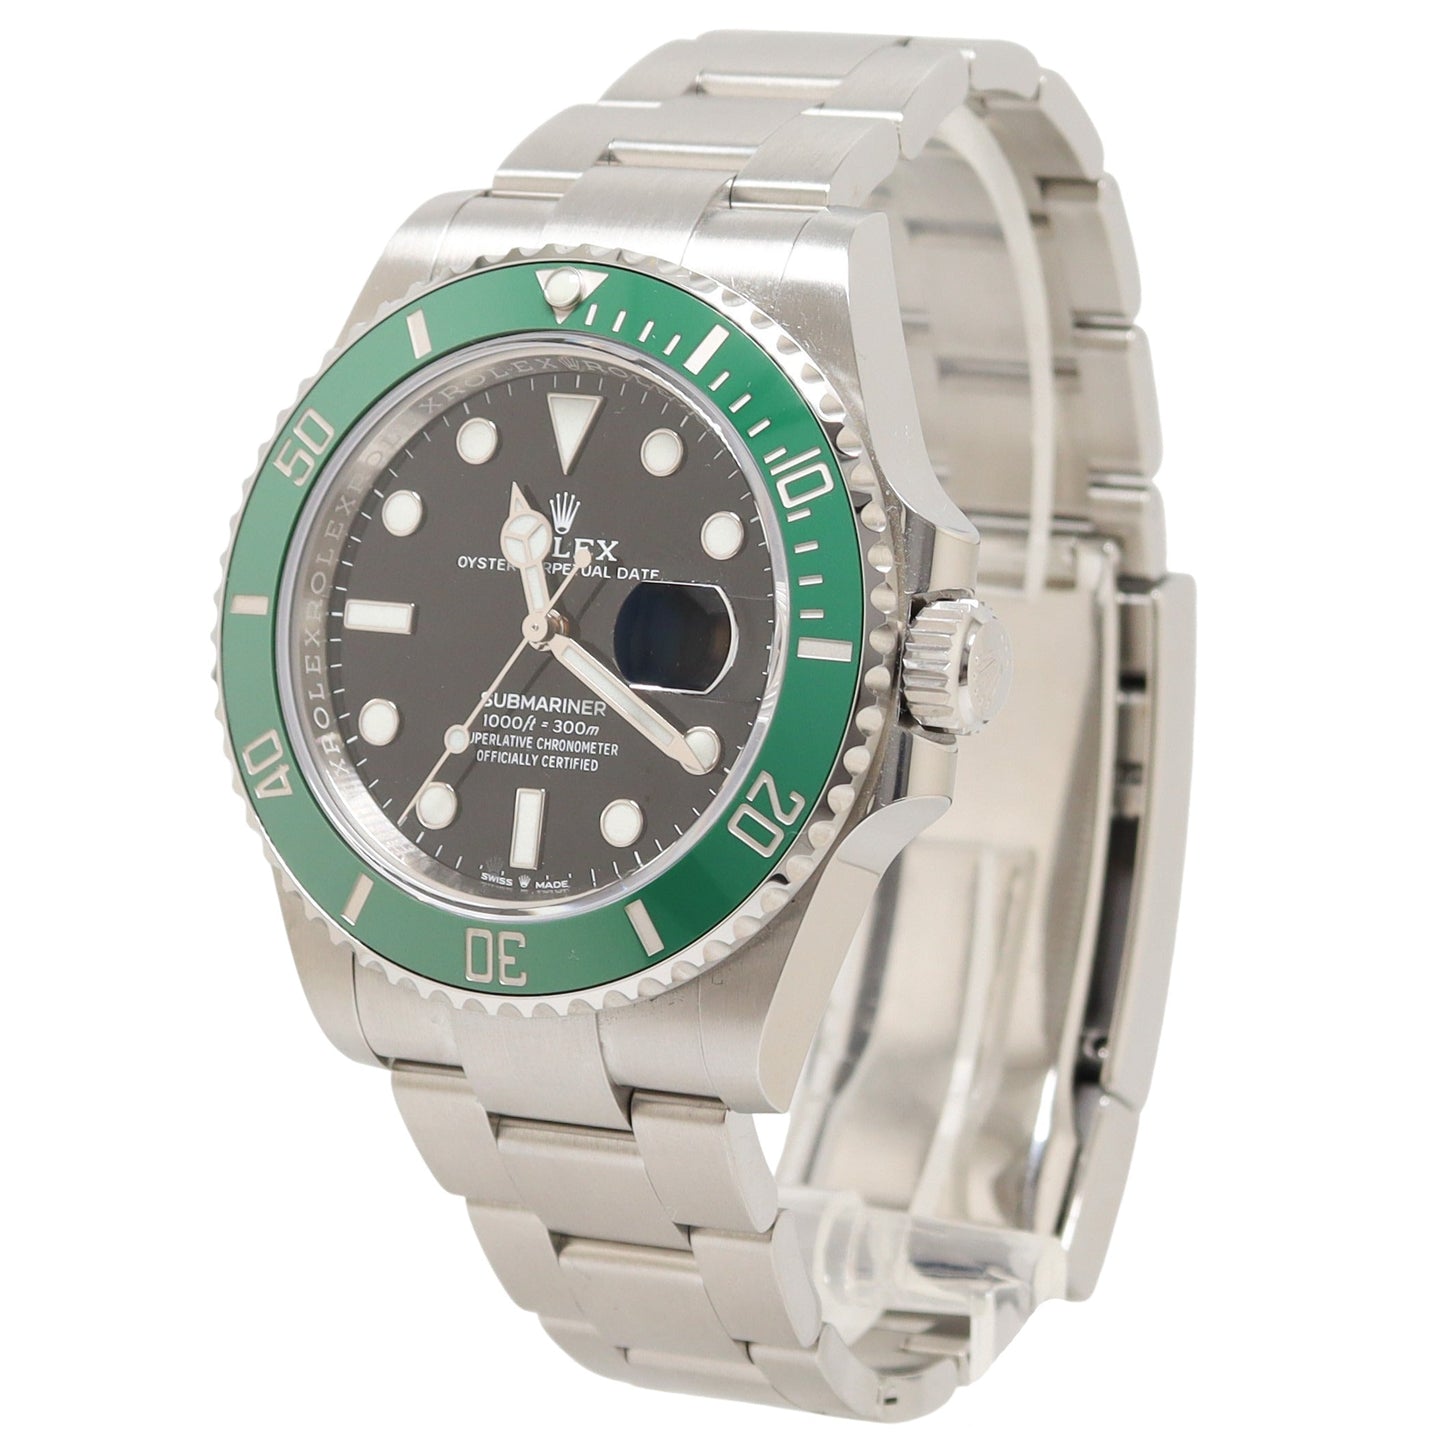 Rolex Submariner "Starbucks" 41mm Stainless Steel Black Dot Dial Watch Reference#: 126610LV - Happy Jewelers Fine Jewelry Lifetime Warranty